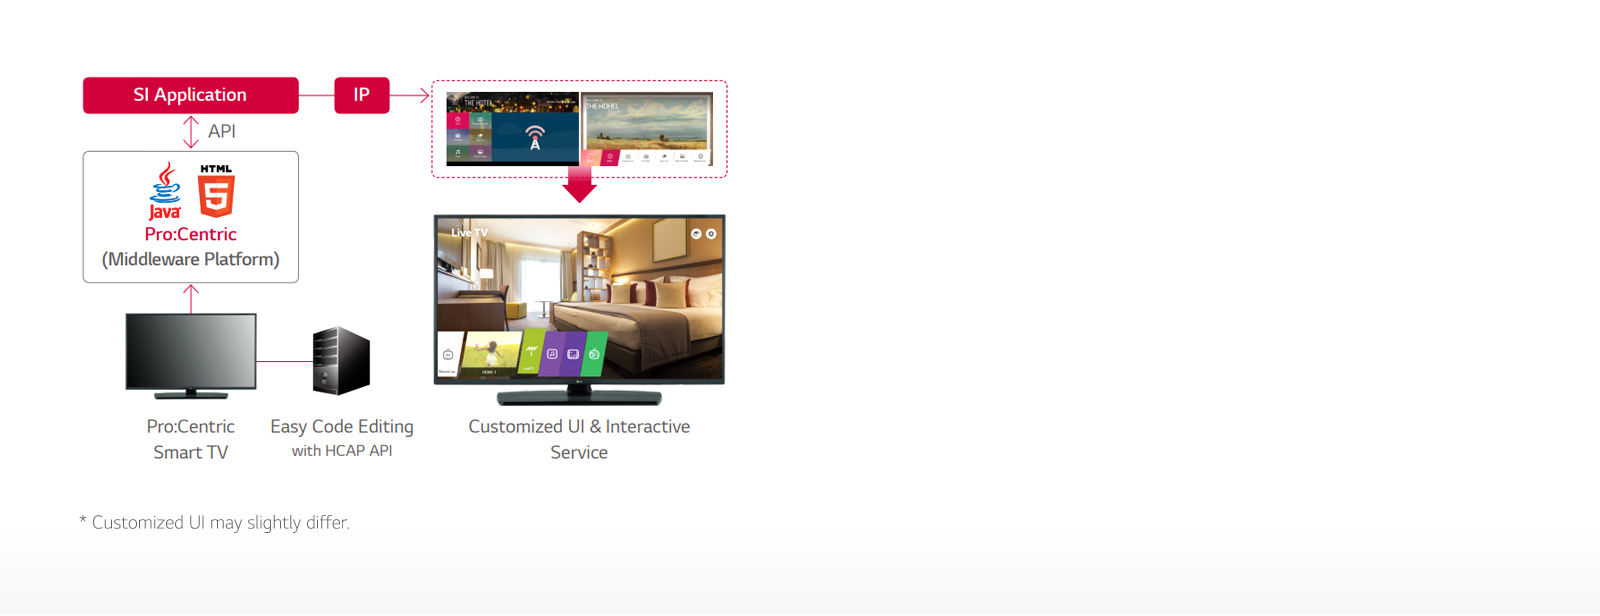 UT665H-02-Pro Centric Hotel Management Solution-Hotel TV-Commercial TV-ID_1566348254036